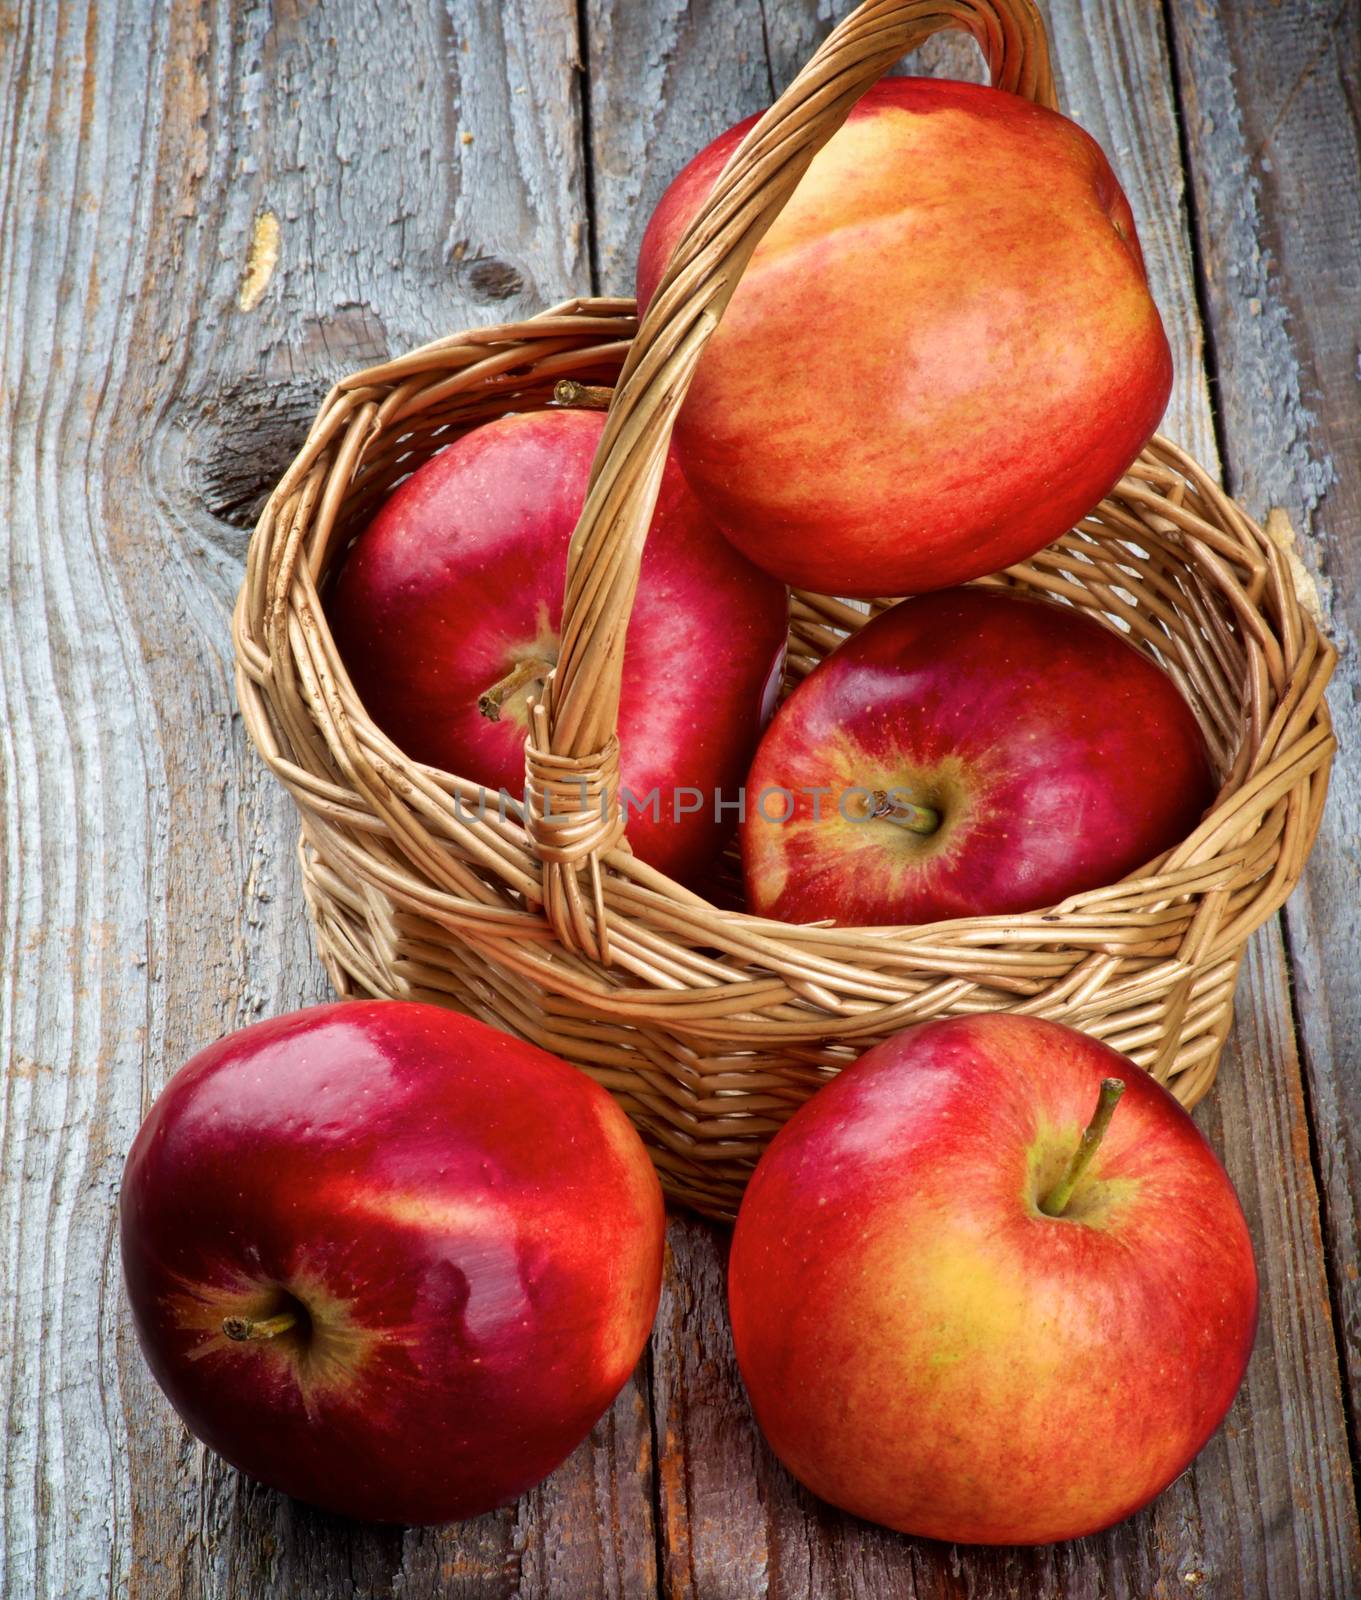 Apples Red Delicious by zhekos